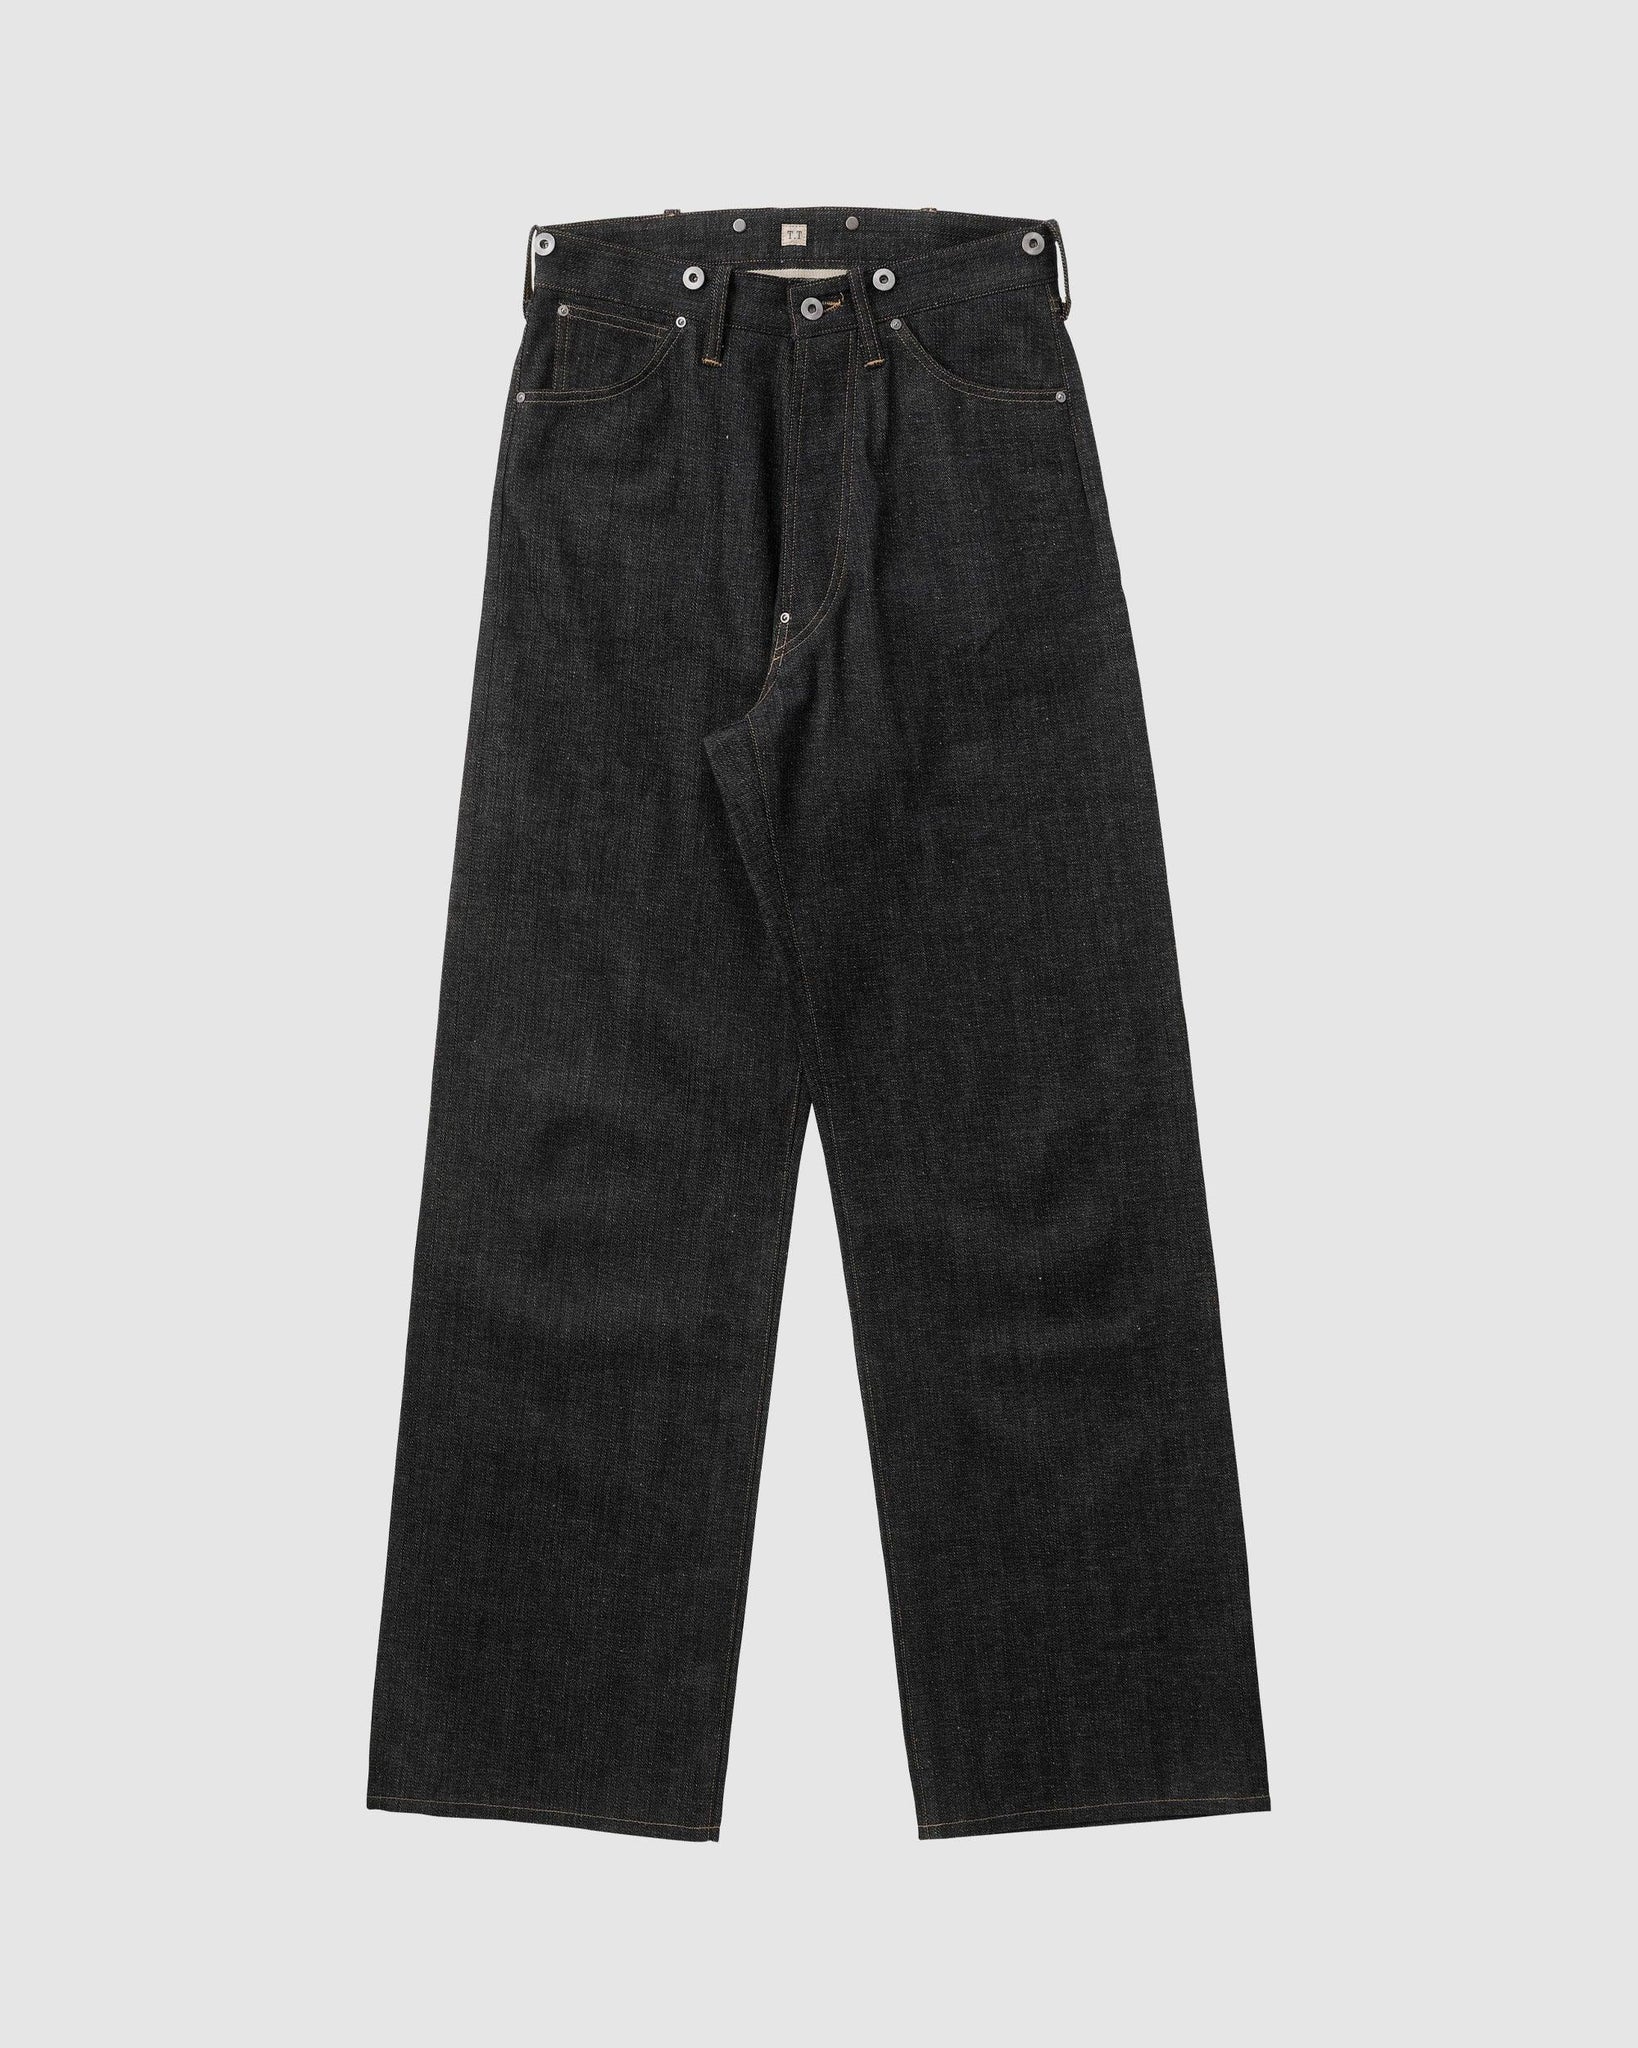 Raw Indigo Lot .704 Denim Trousers C.1920'S - {{ collection.title }} - Chinatown Country Club 